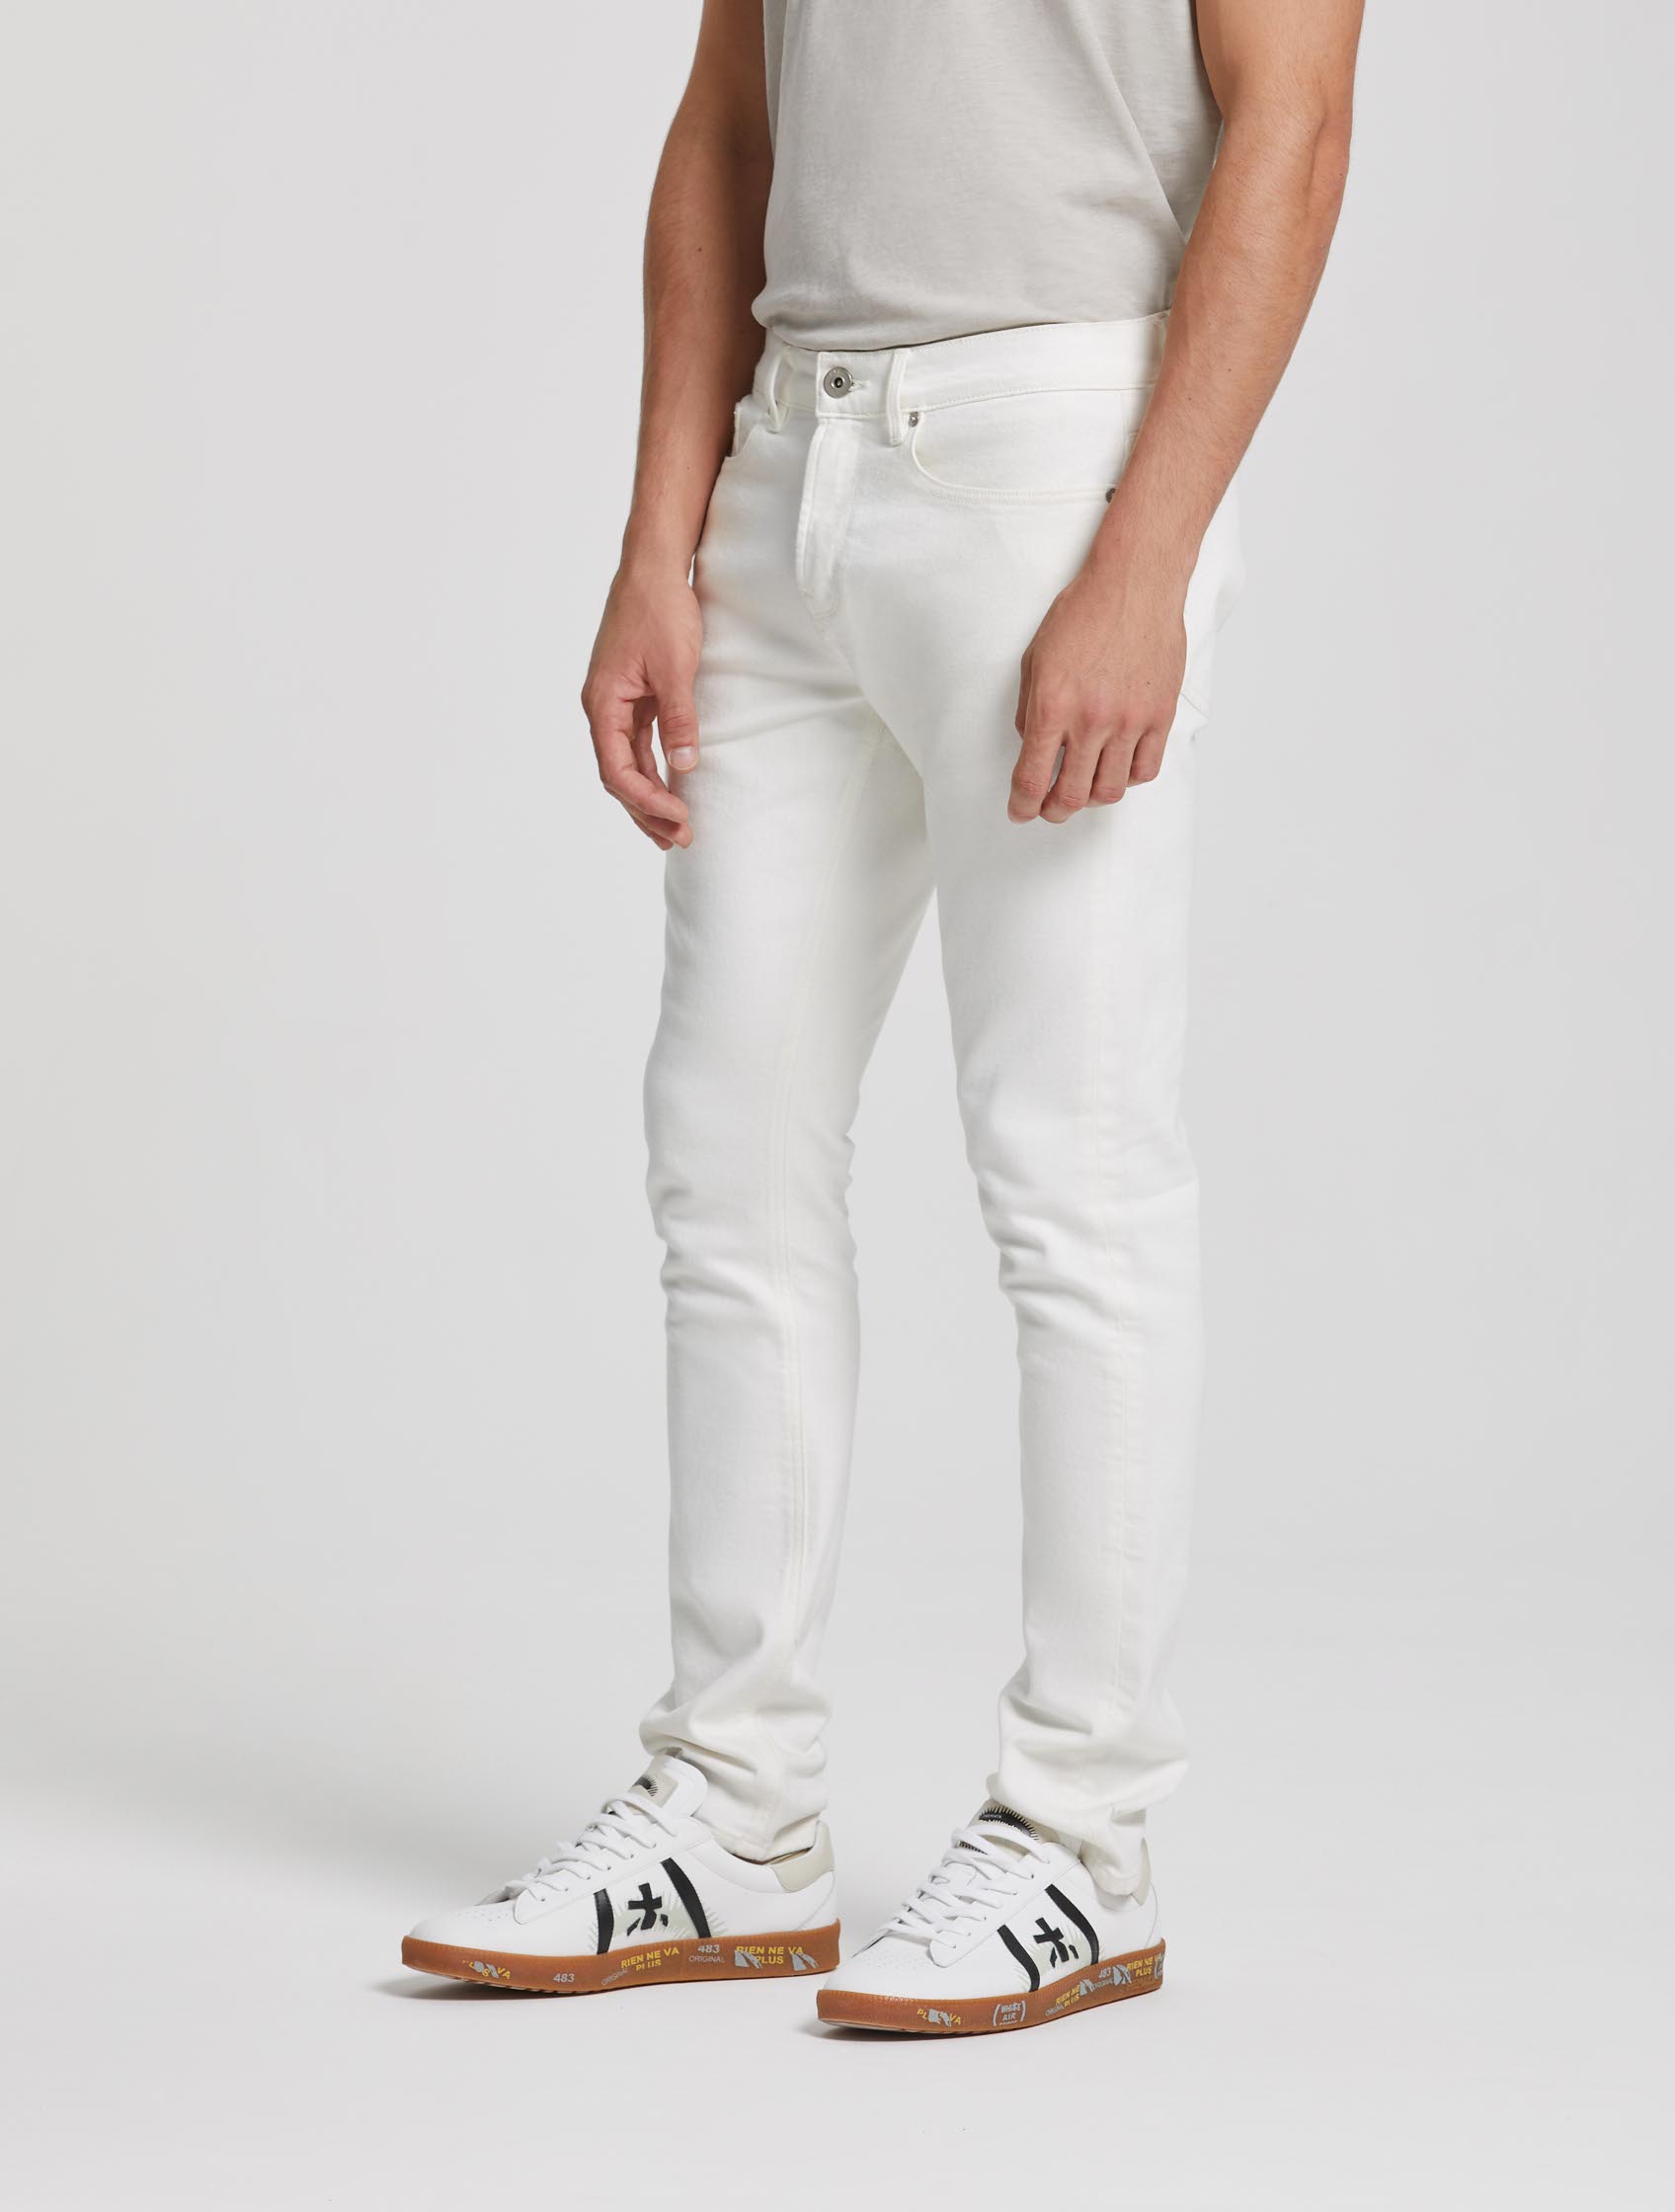 rise_jean-madison-off-white_34-30-2024__picture-6155